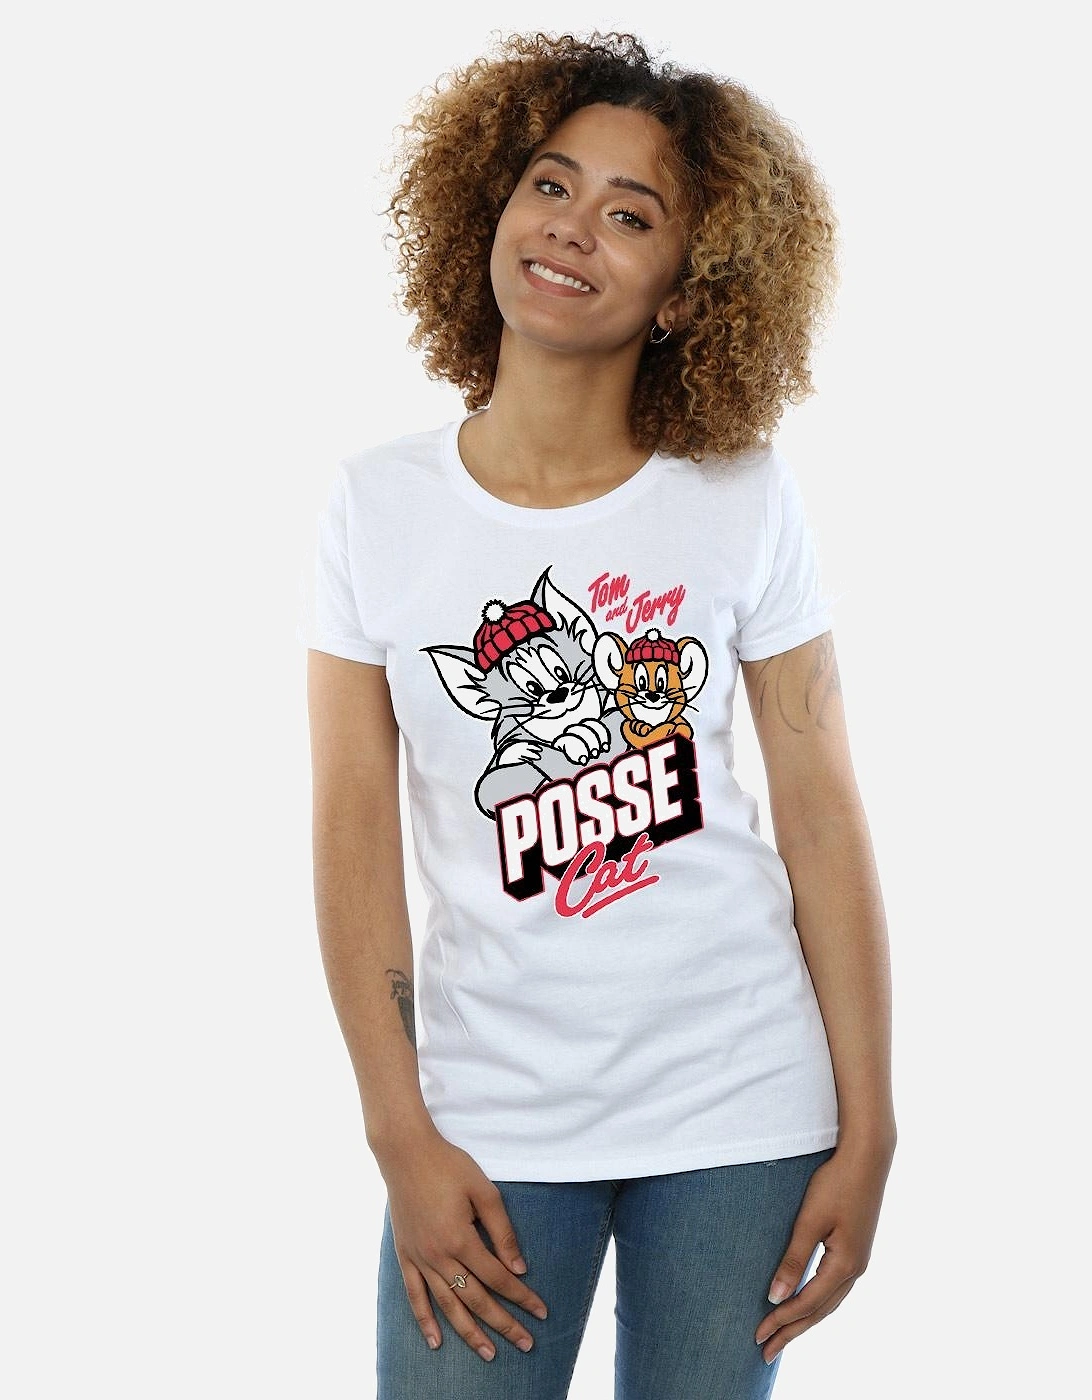 Tom And Jerry Womens/Ladies Posse Cat Cotton T-Shirt